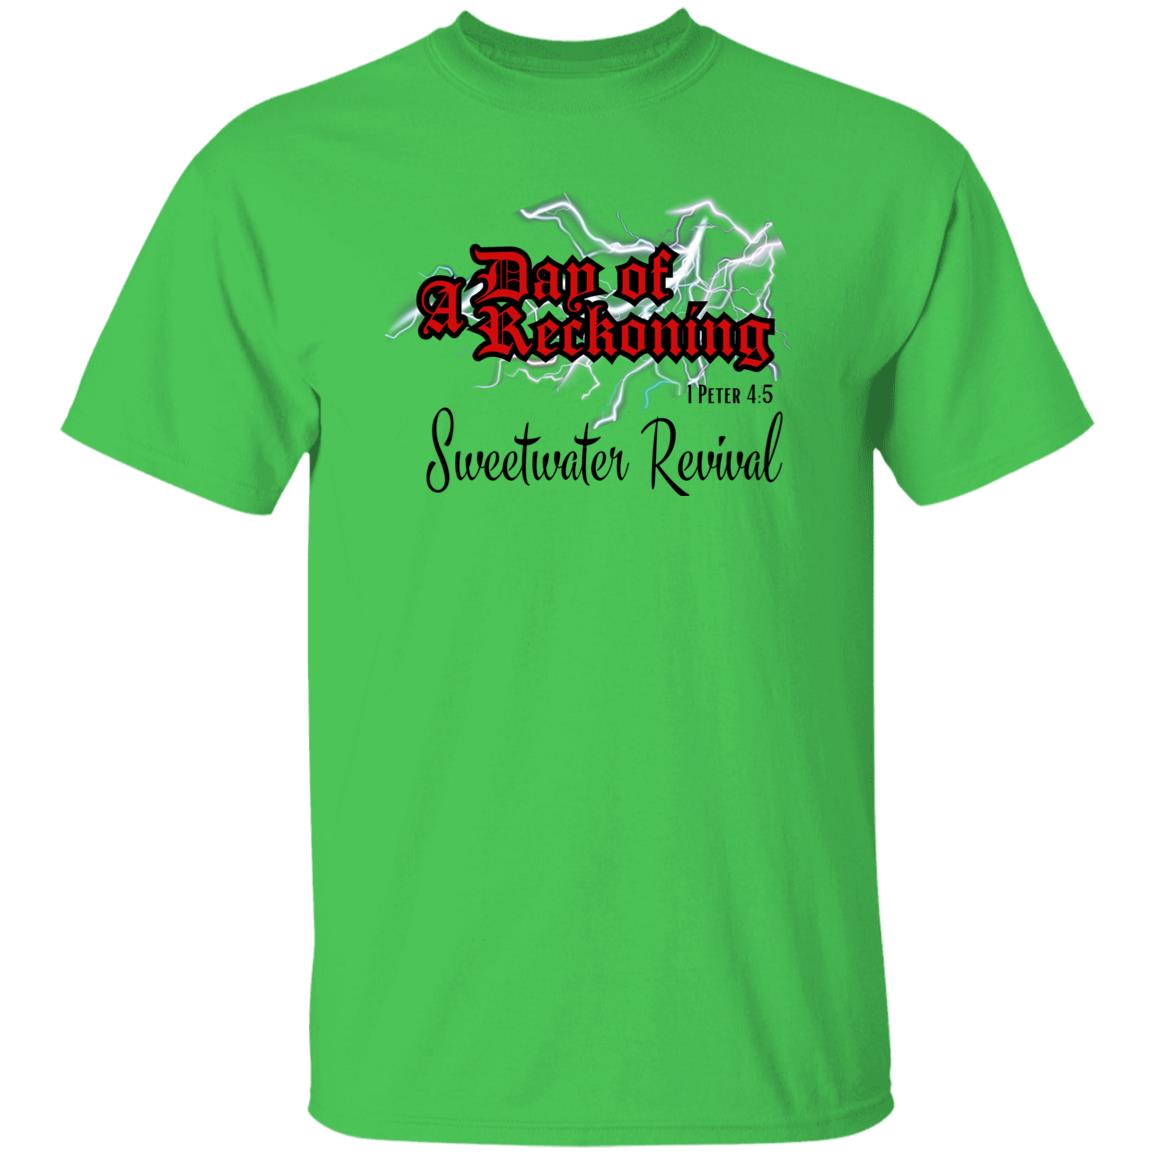 Sweetwater Revival A Day Of Reckoning T-Shirt